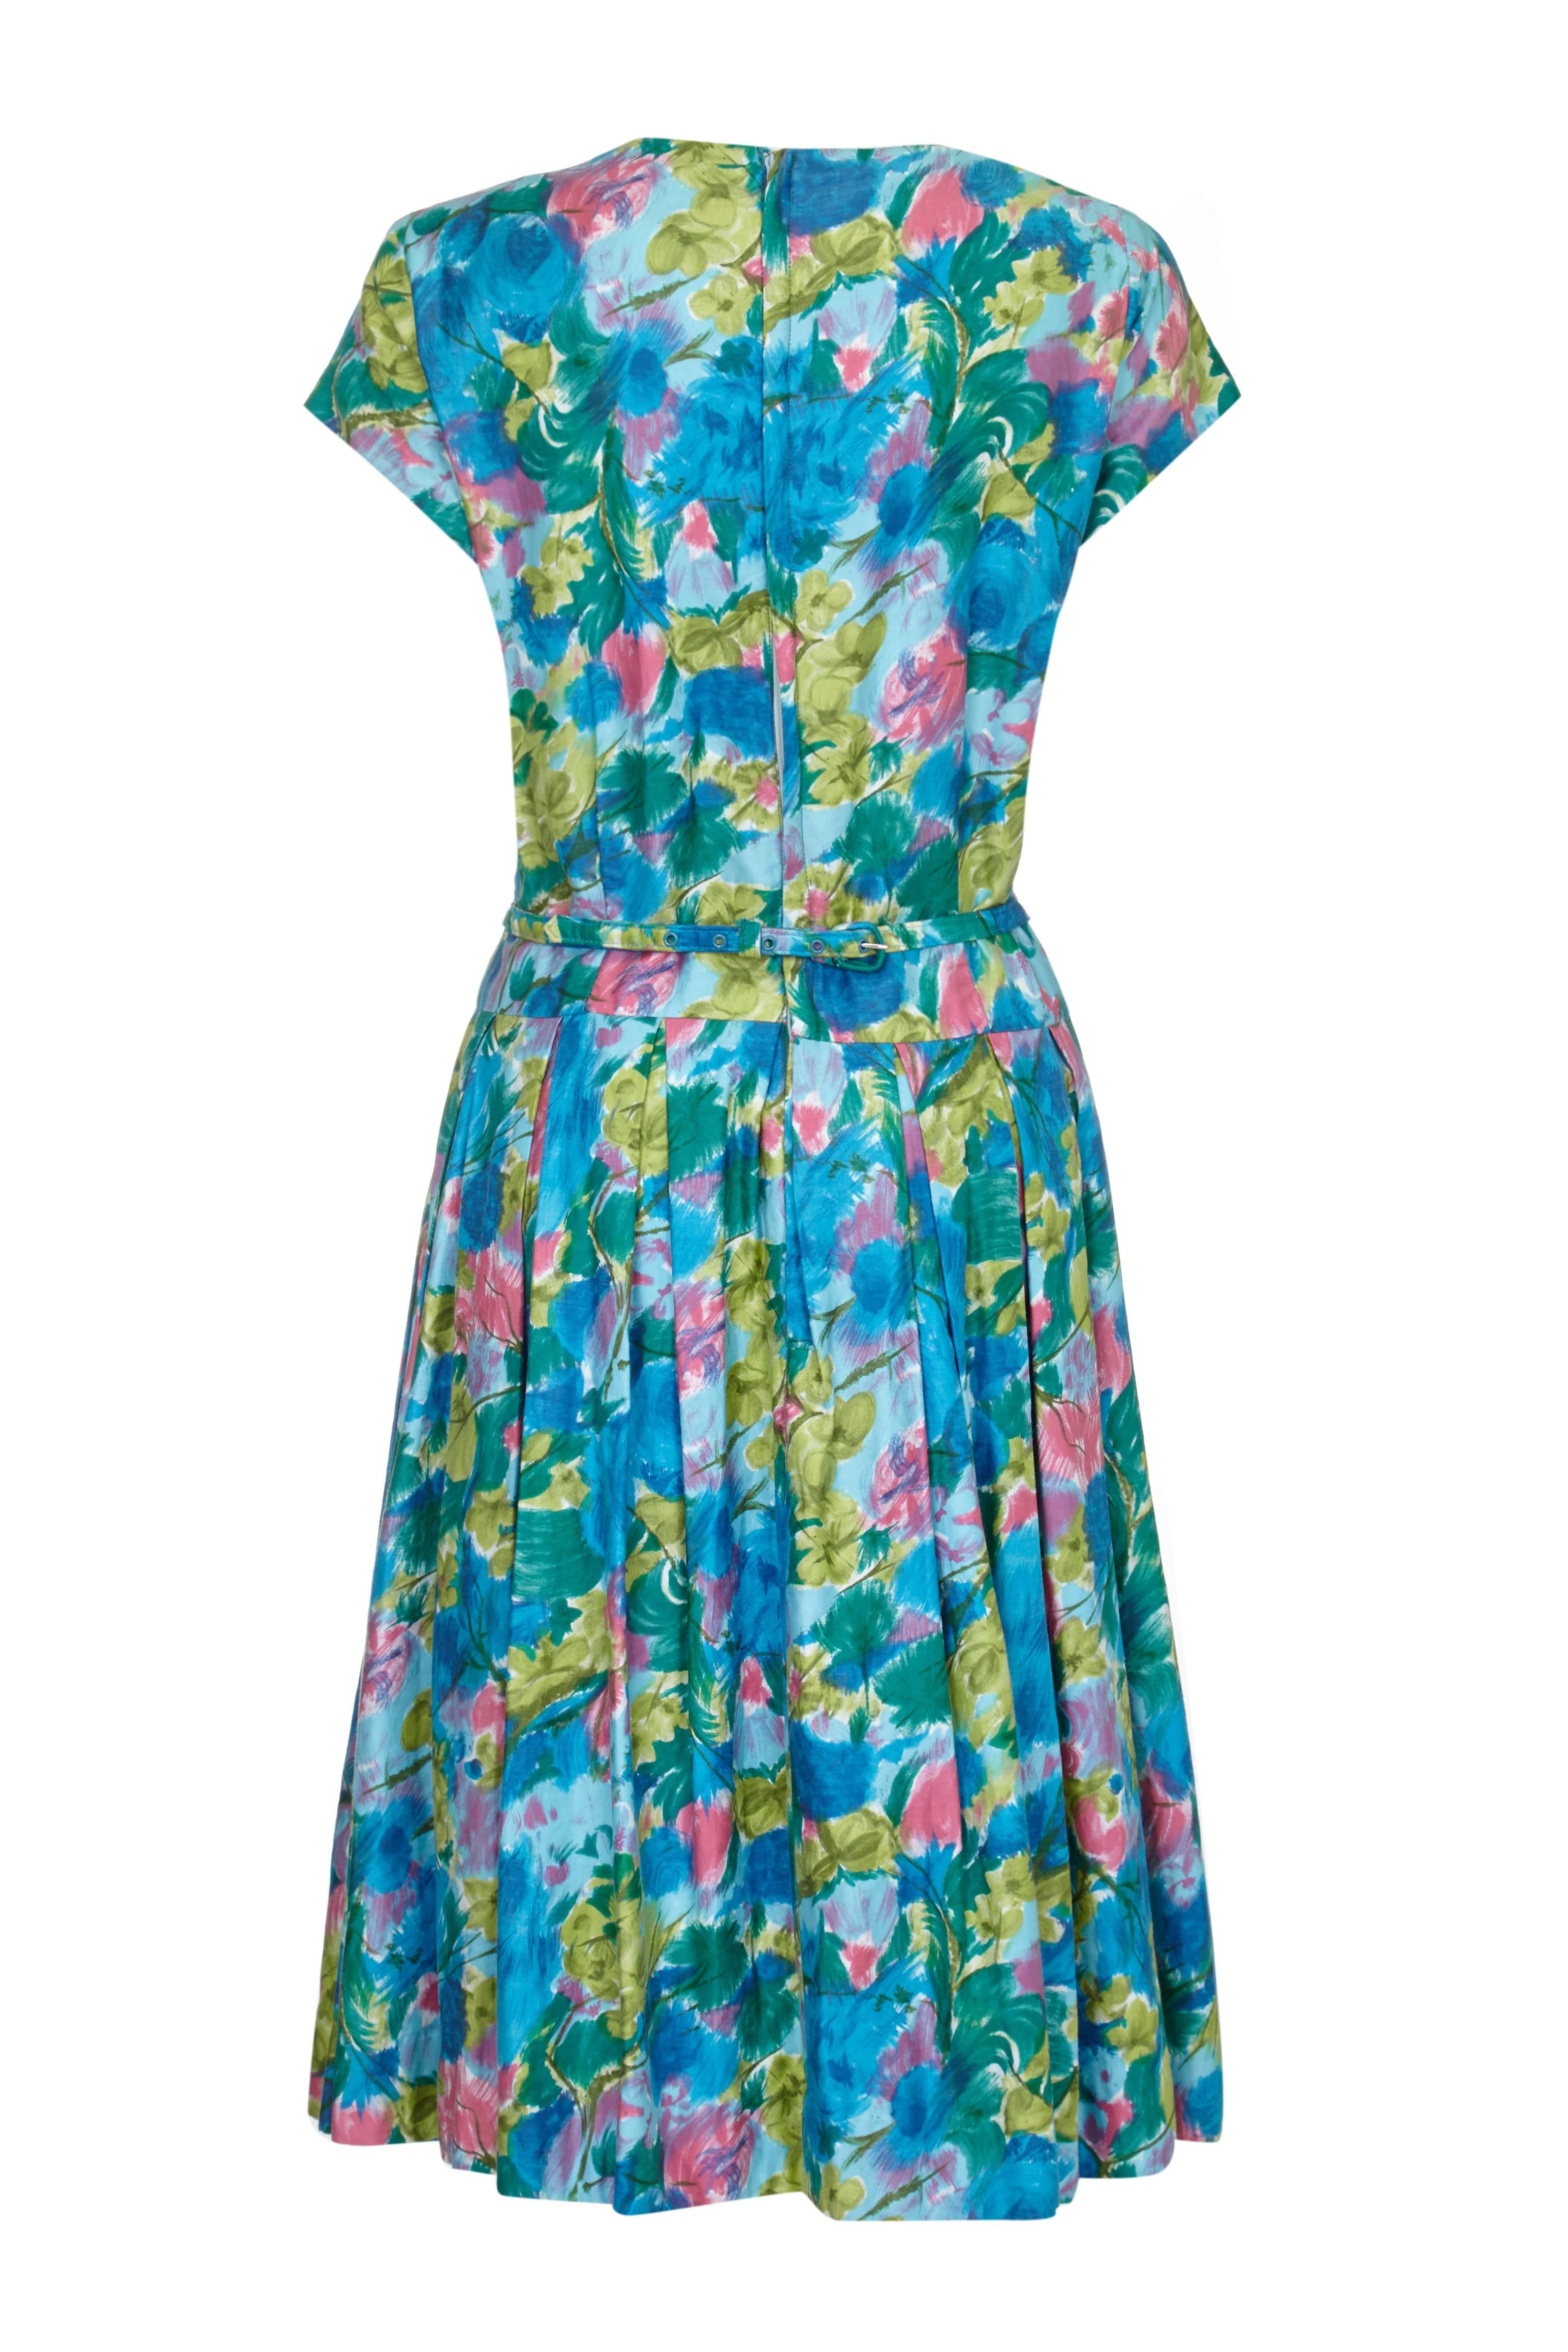 This lovely Riddella 1950s or early 1960s cotton dress with abstract floral print in green blue and pink is vivacious, versatile and a great choice for the Summer. It features princess seams on the bodice with green piping and bow details at the